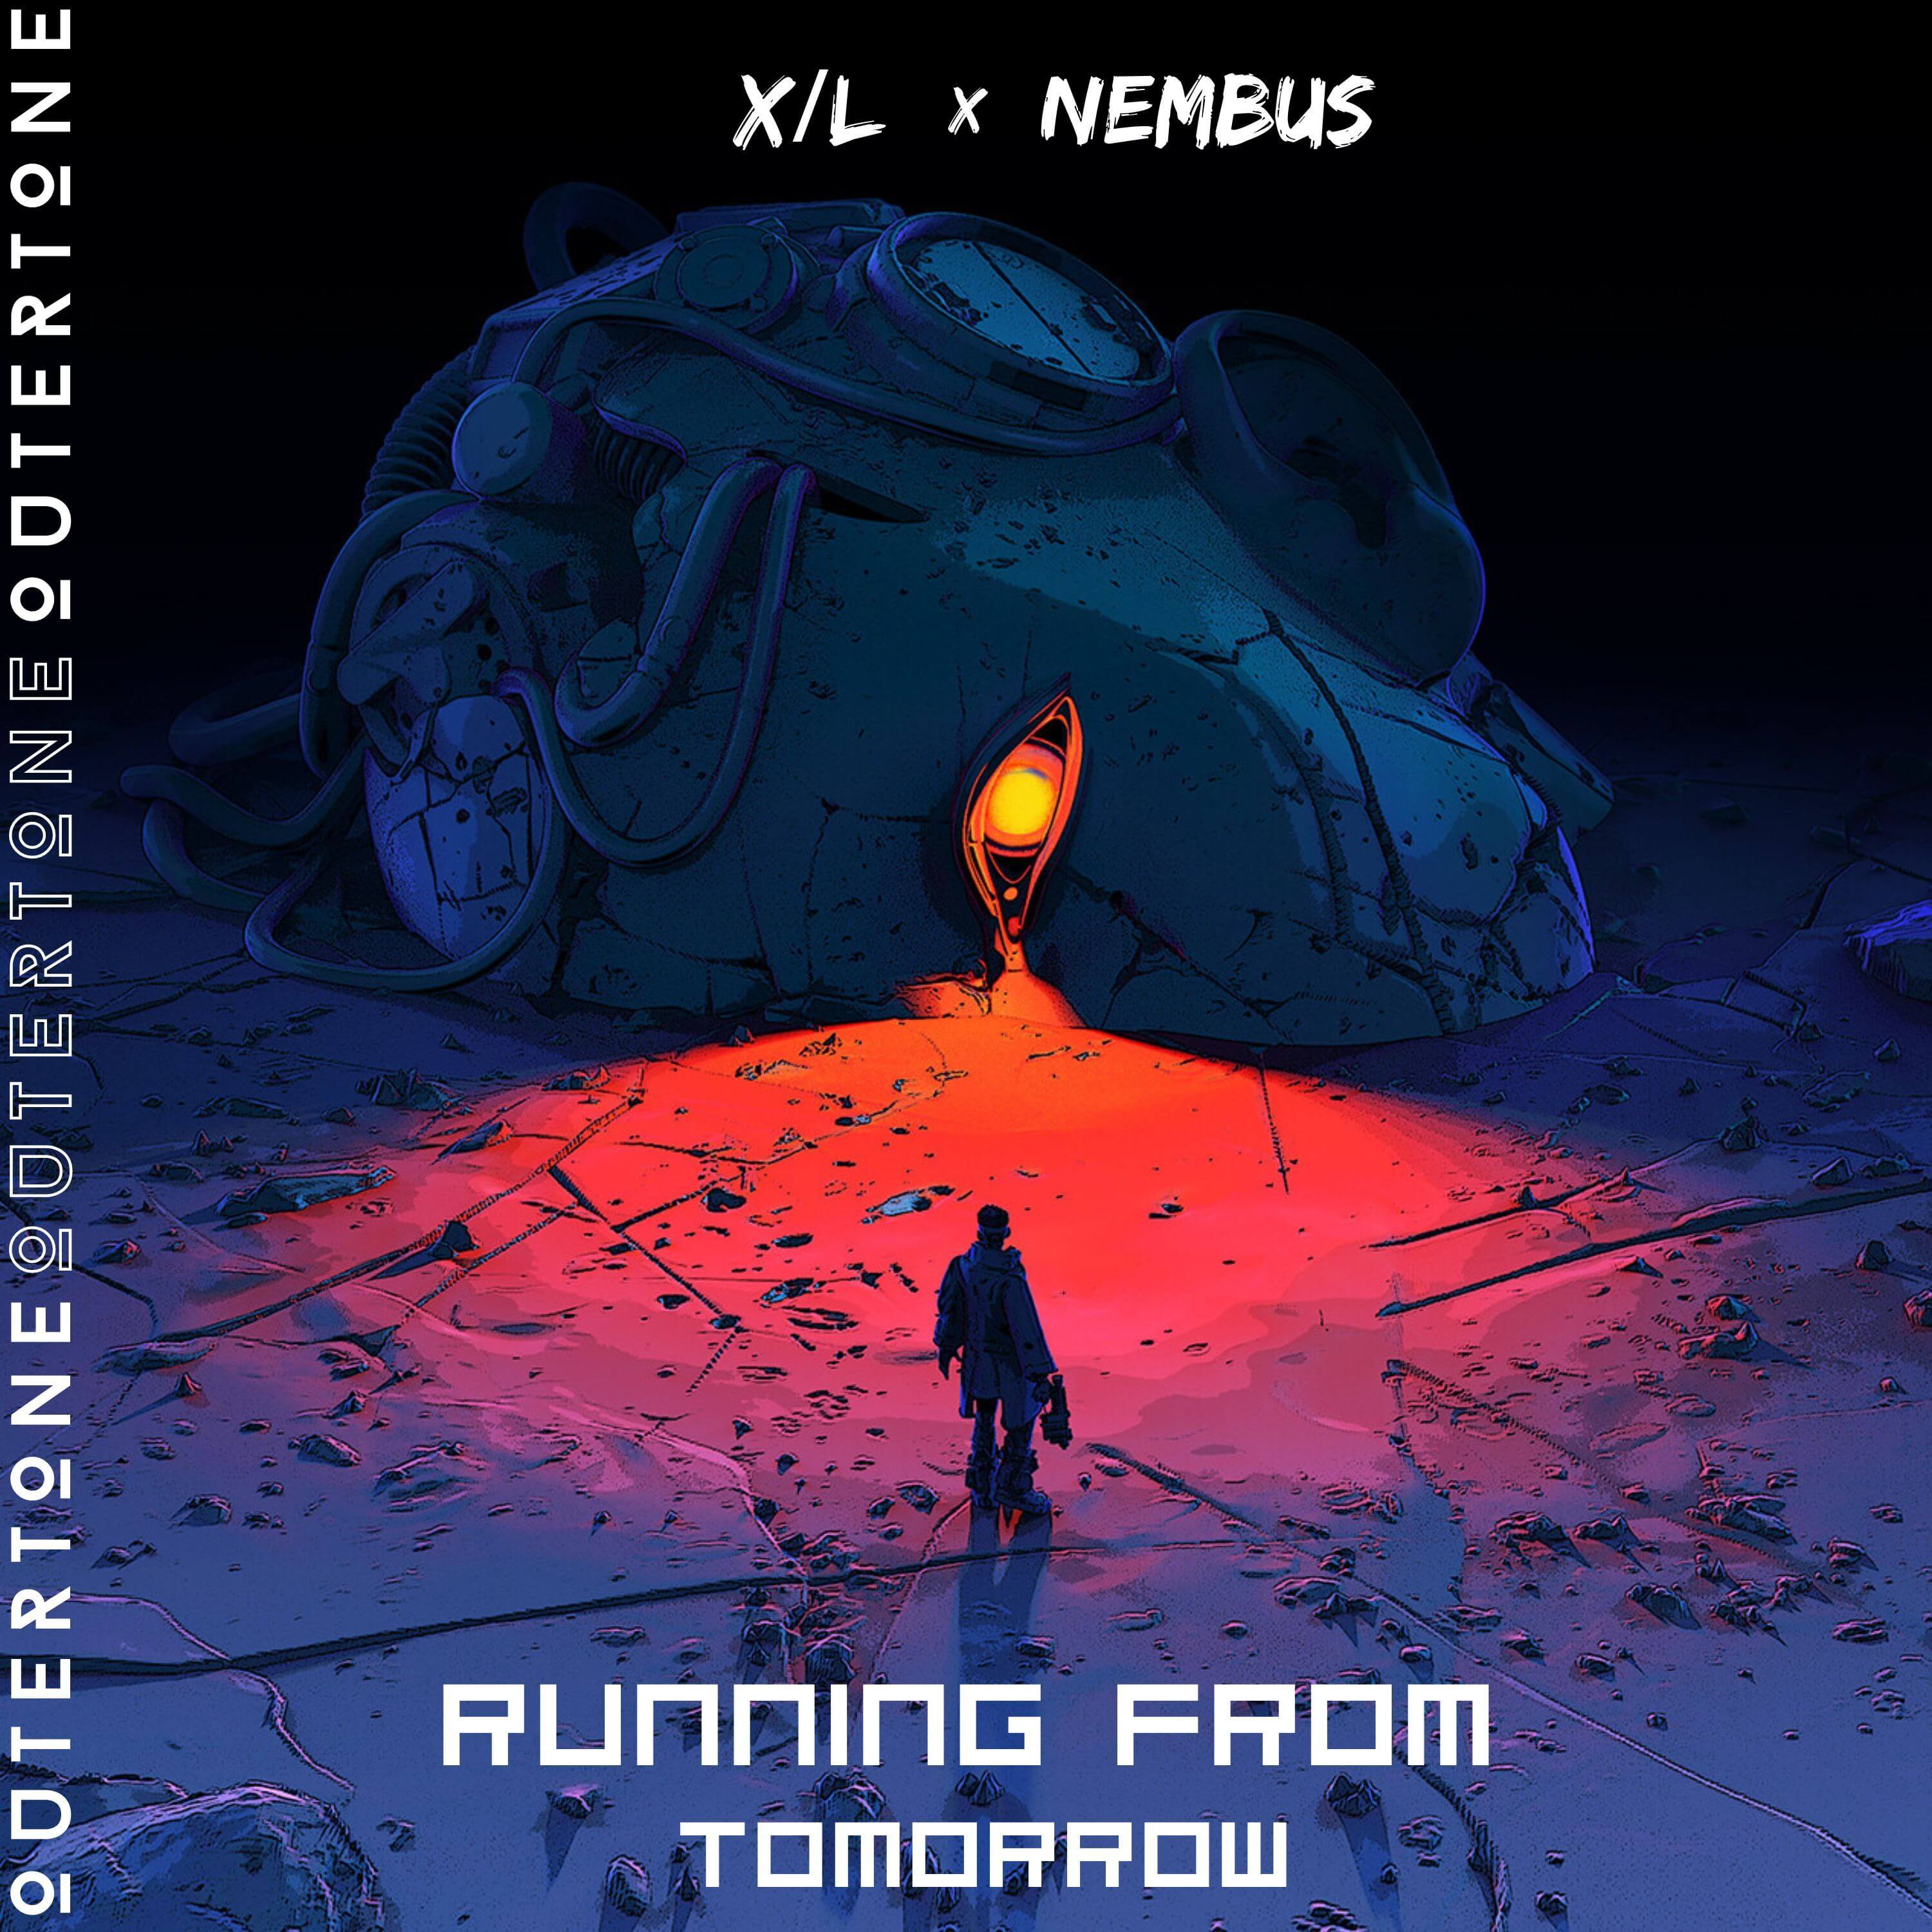 Pre-save “Running From Tomorrow” and get a free sample pack from NEMBUS!